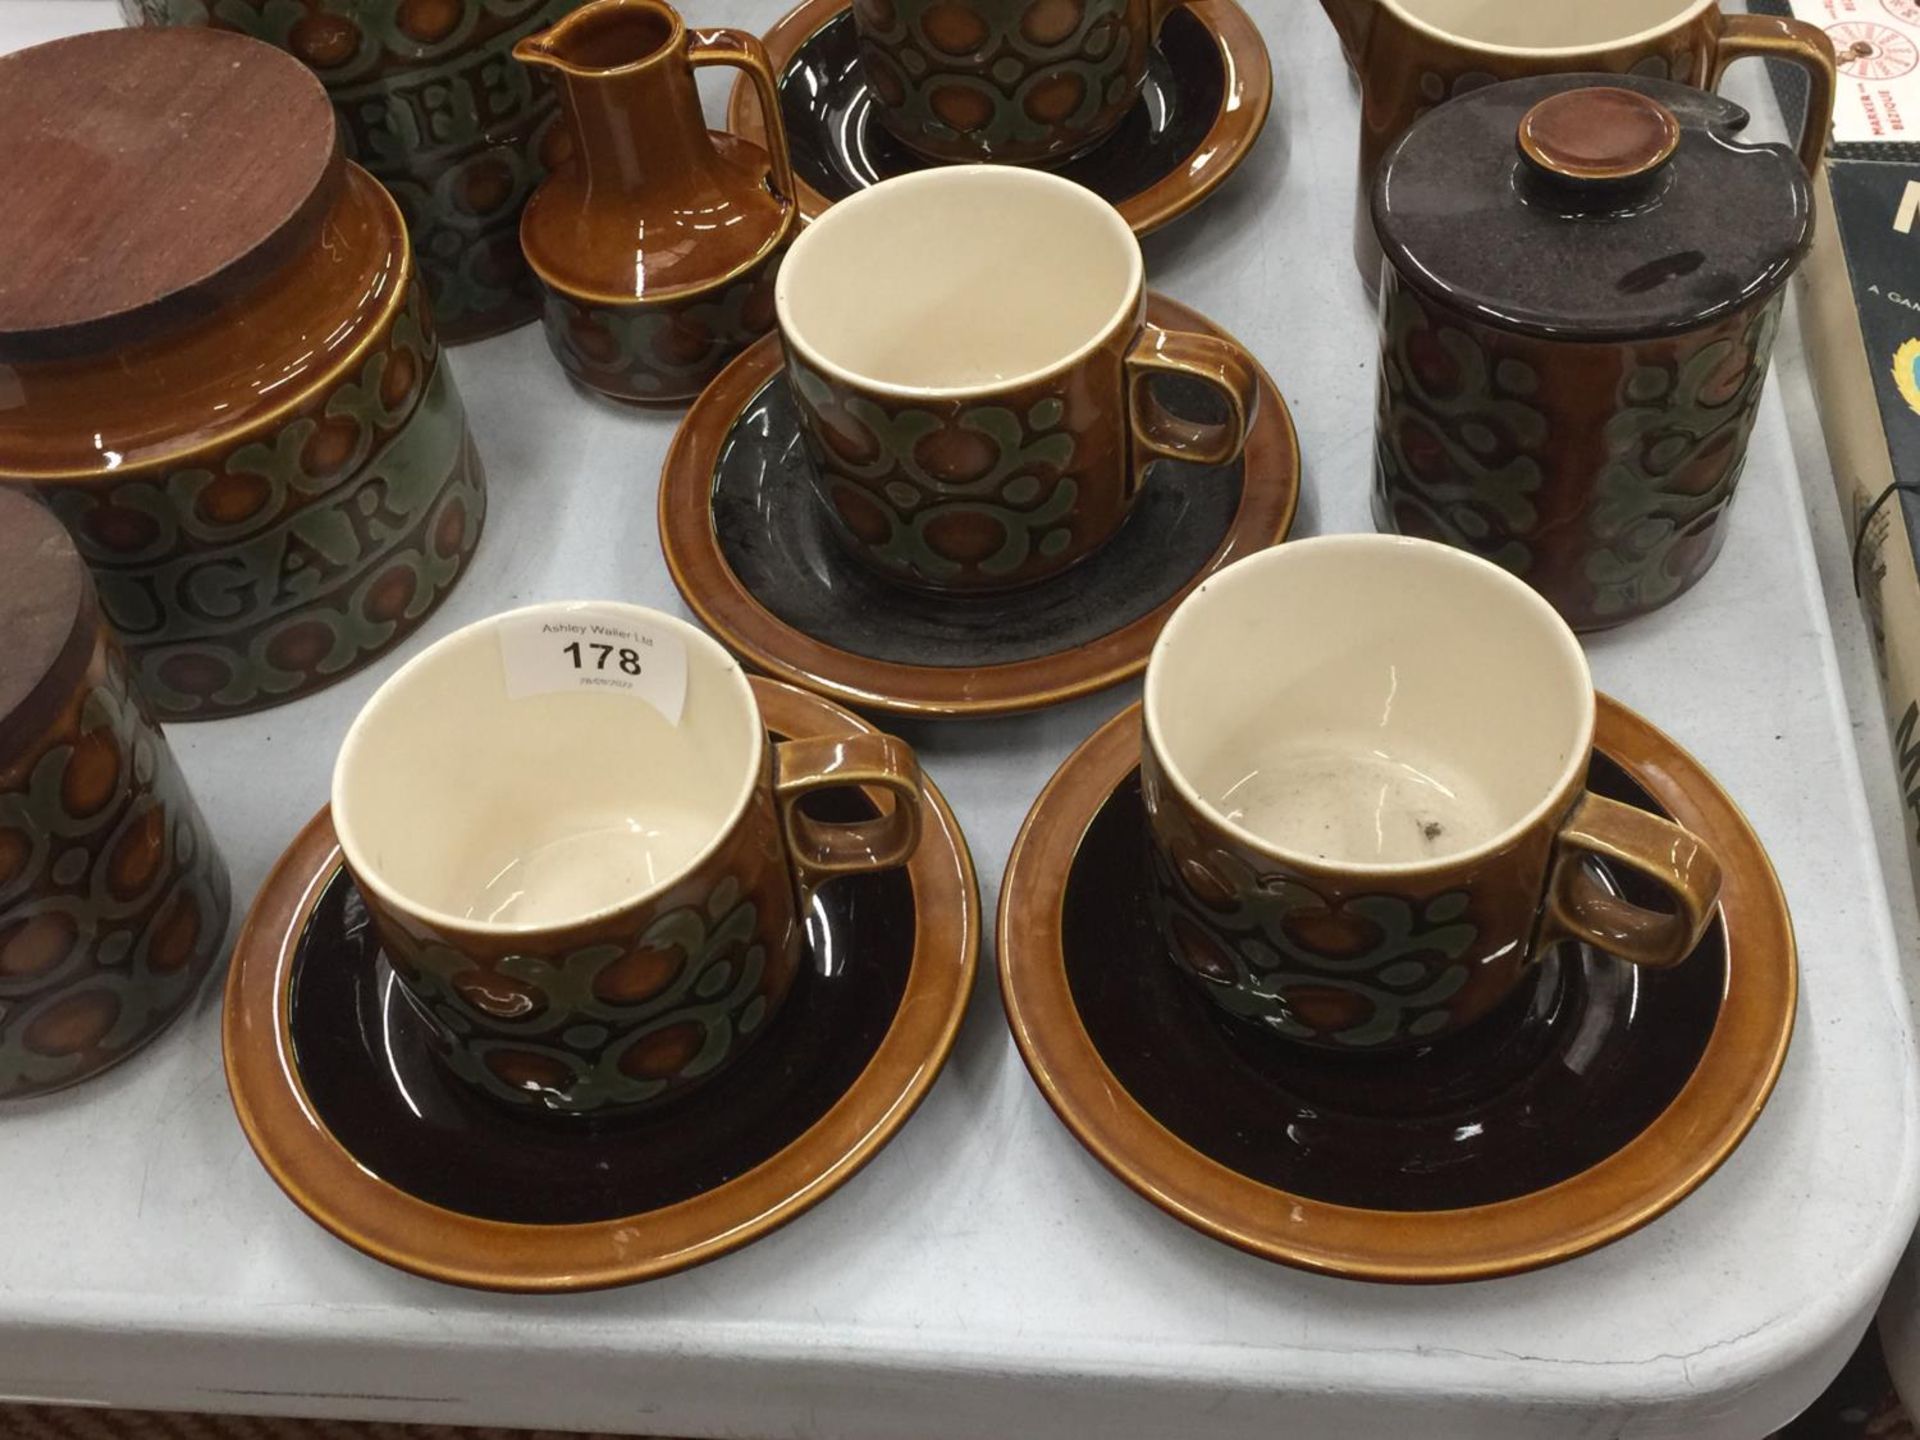 A QUANTITY OF HORNSEA POTTERY 'BRONTE' TO INCLUDE STORAGE JARS, TUREEN, CUPS, SAUCERS, JUGS, SUGAR - Image 2 of 7